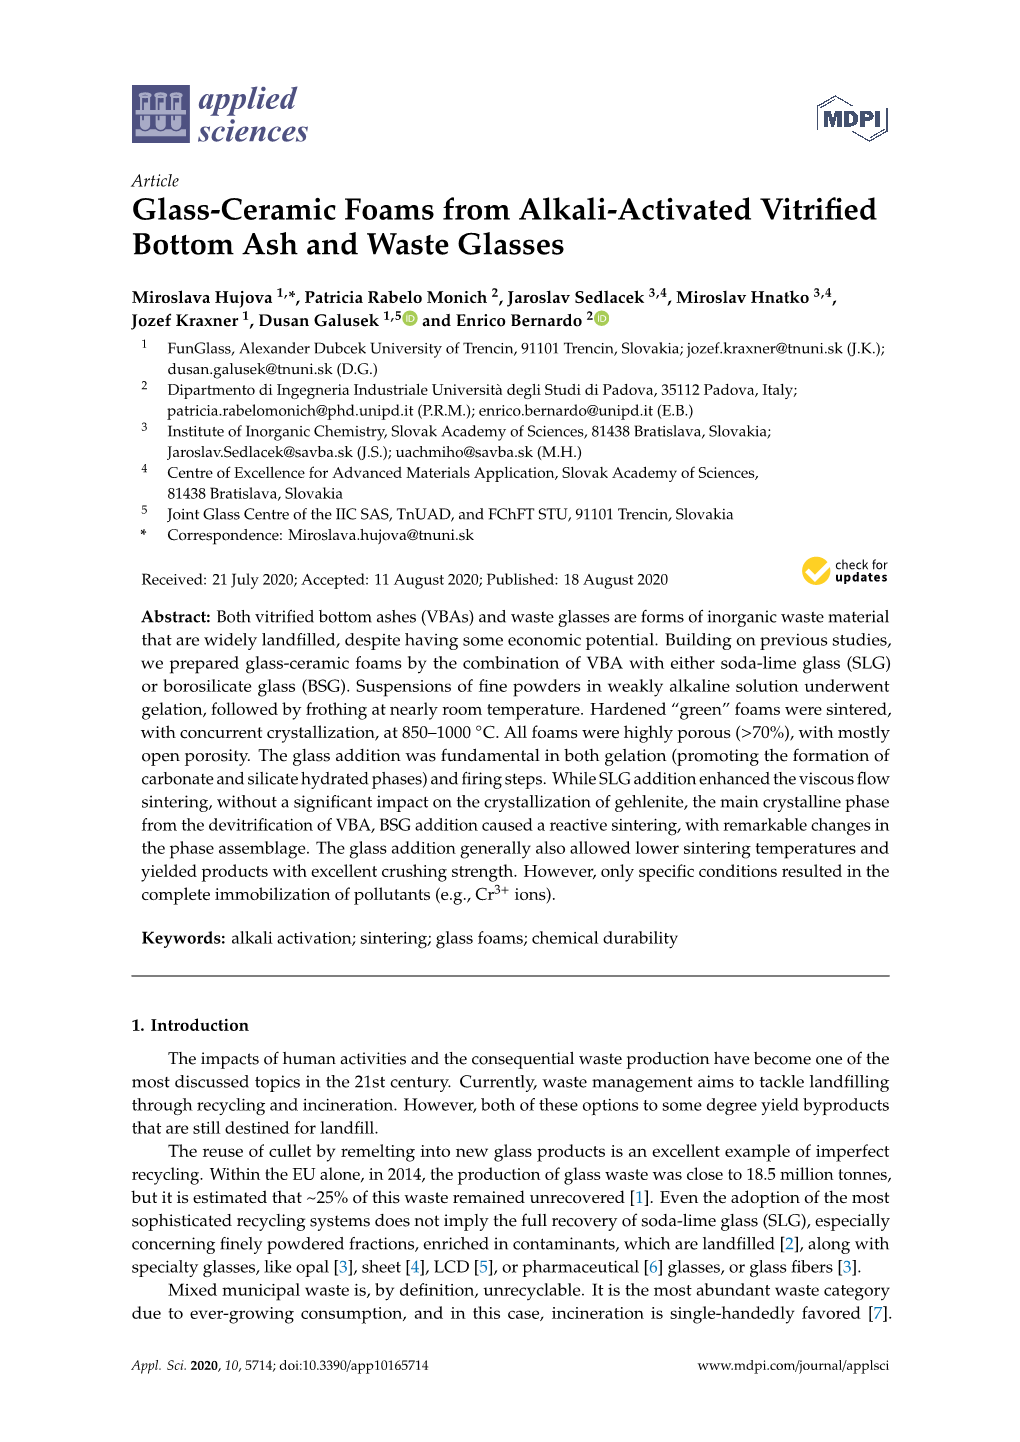 Glass-Ceramic Foams from Alkali-Activated Vitrified Bottom Ash